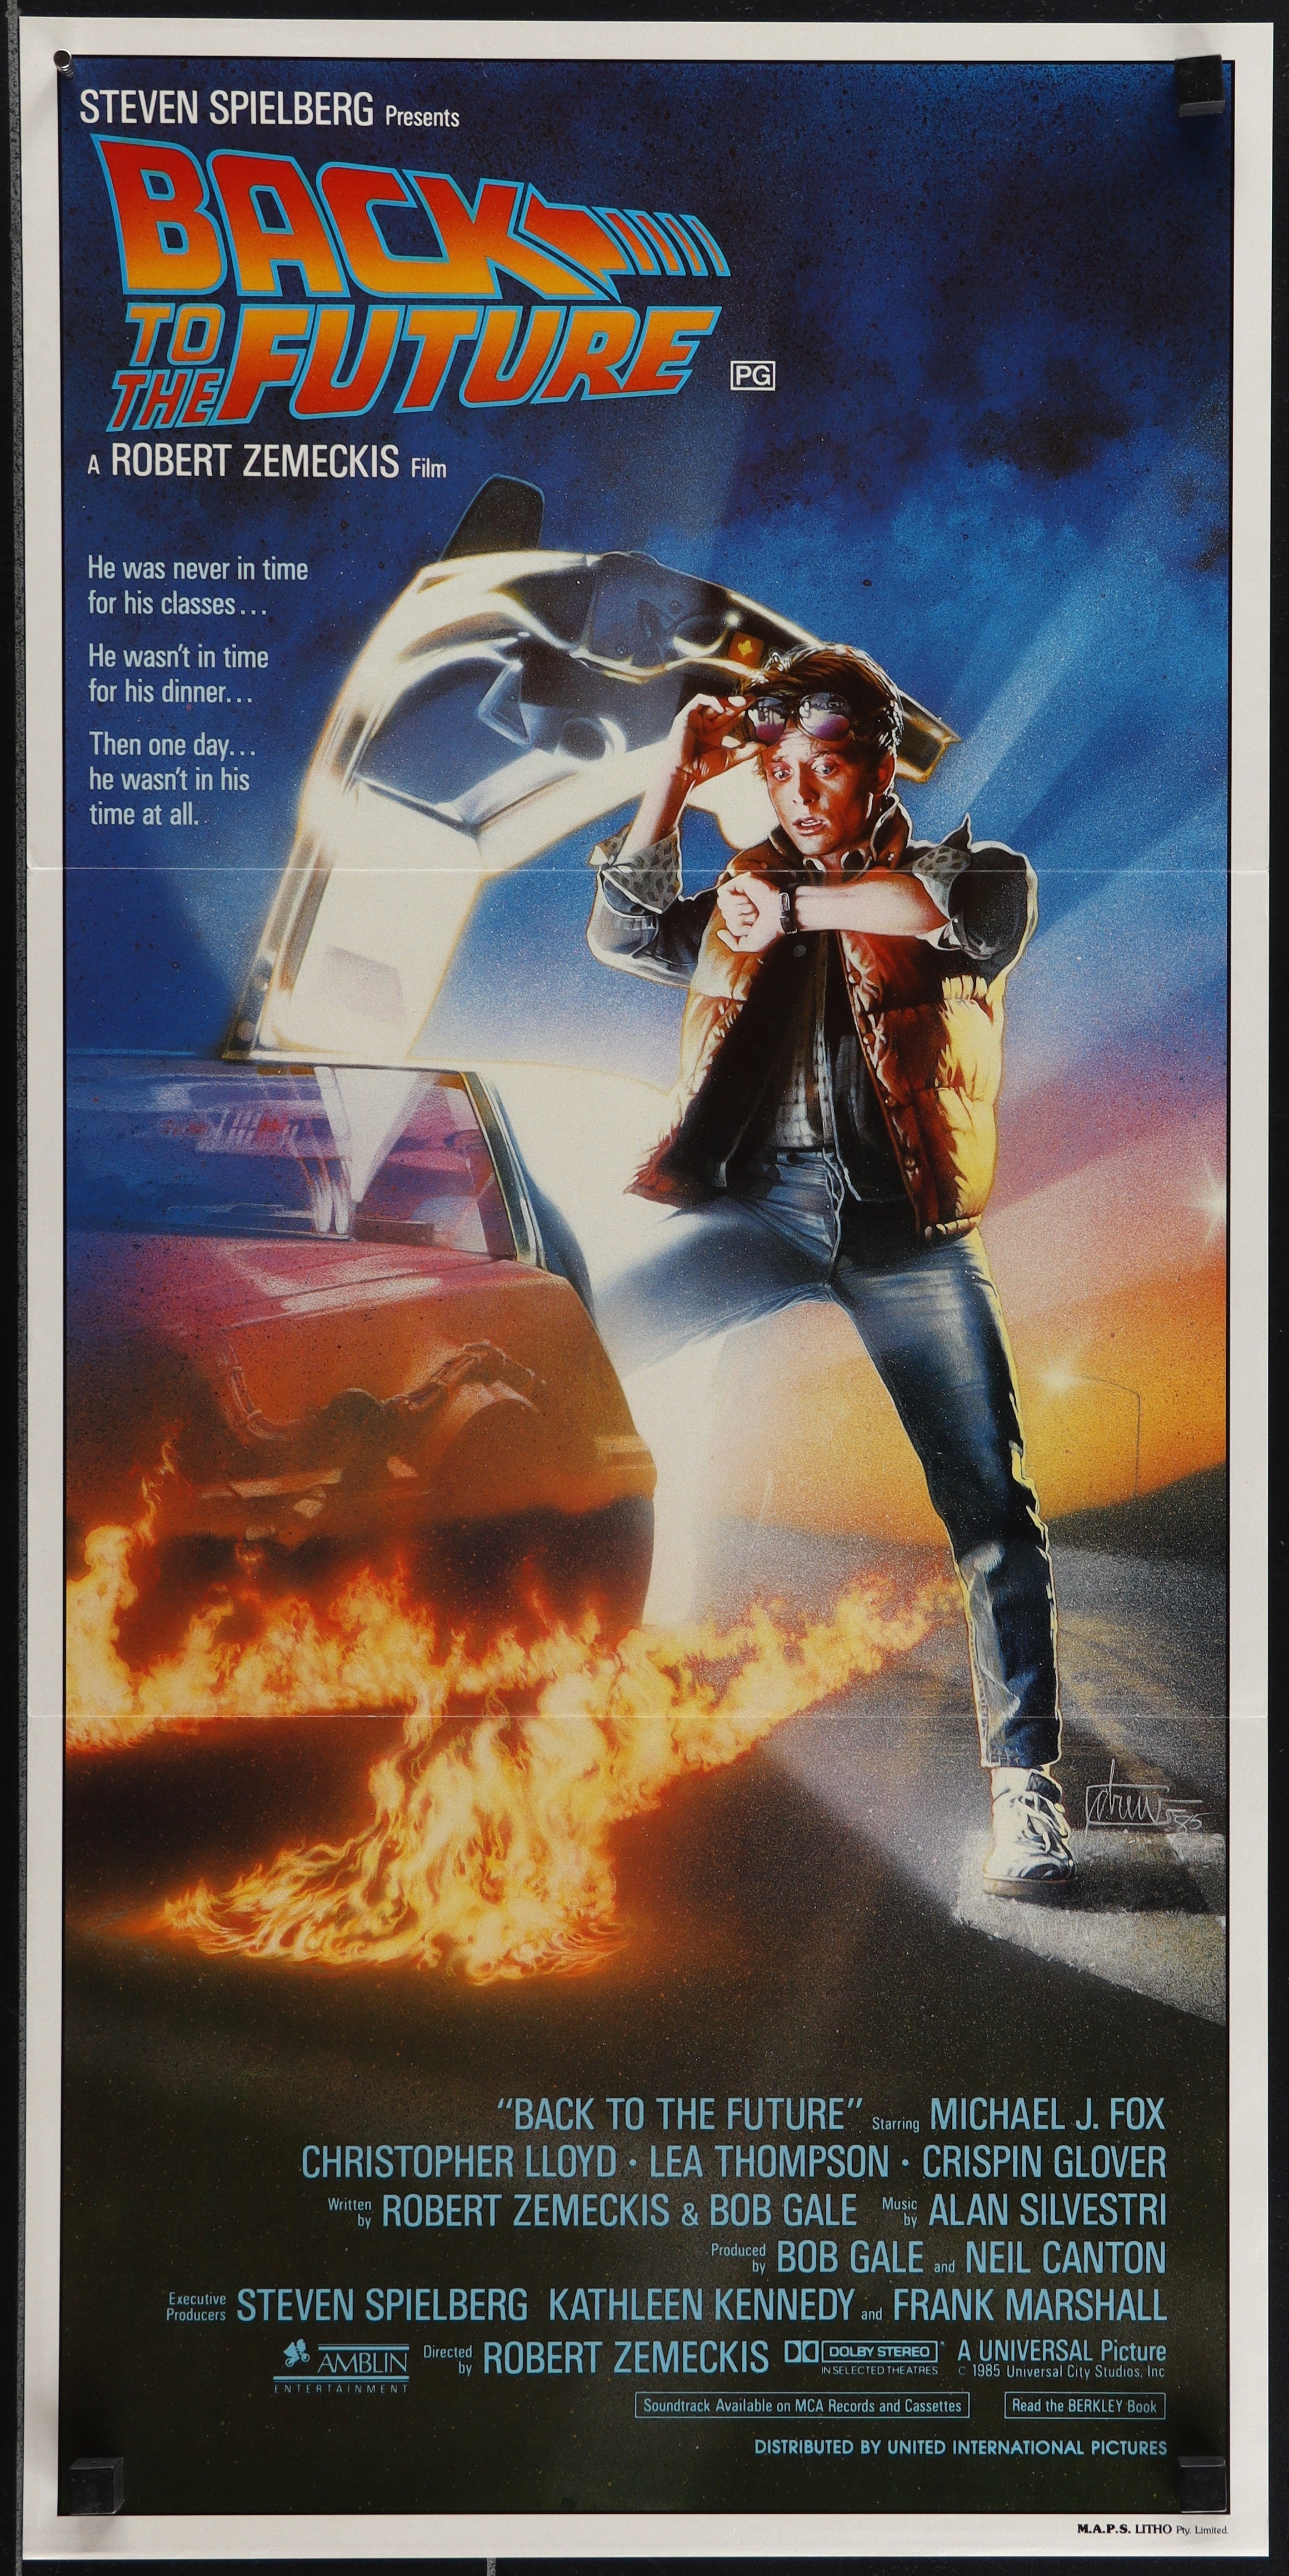 BACK TO THE FUTURE (1985)